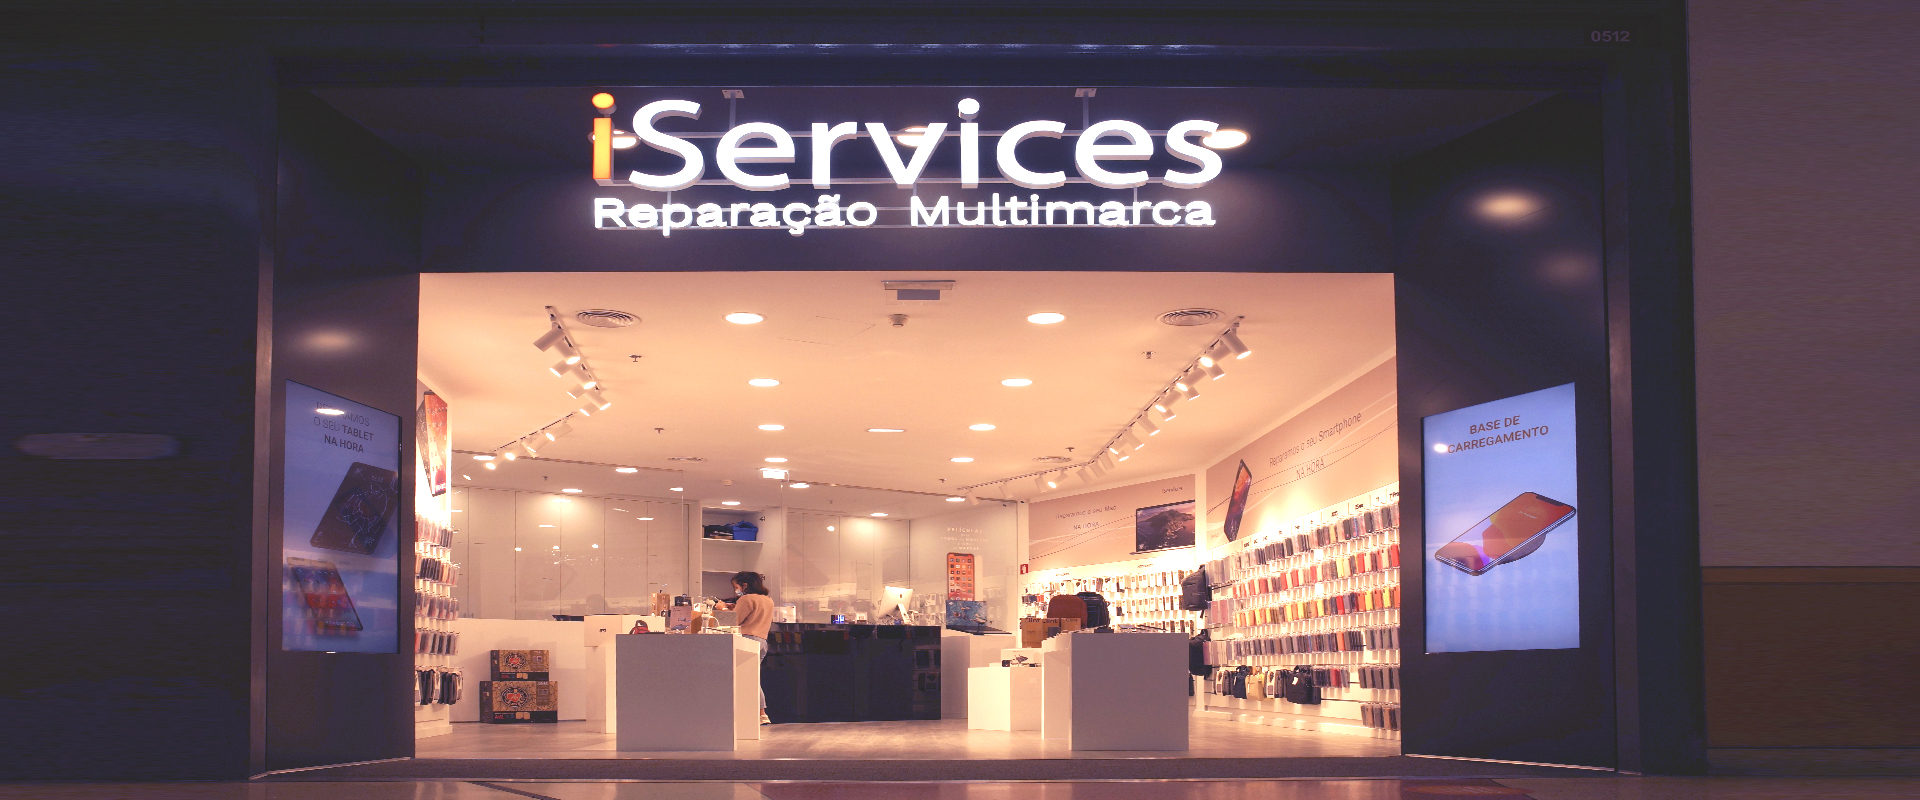 iServices NorteShopping